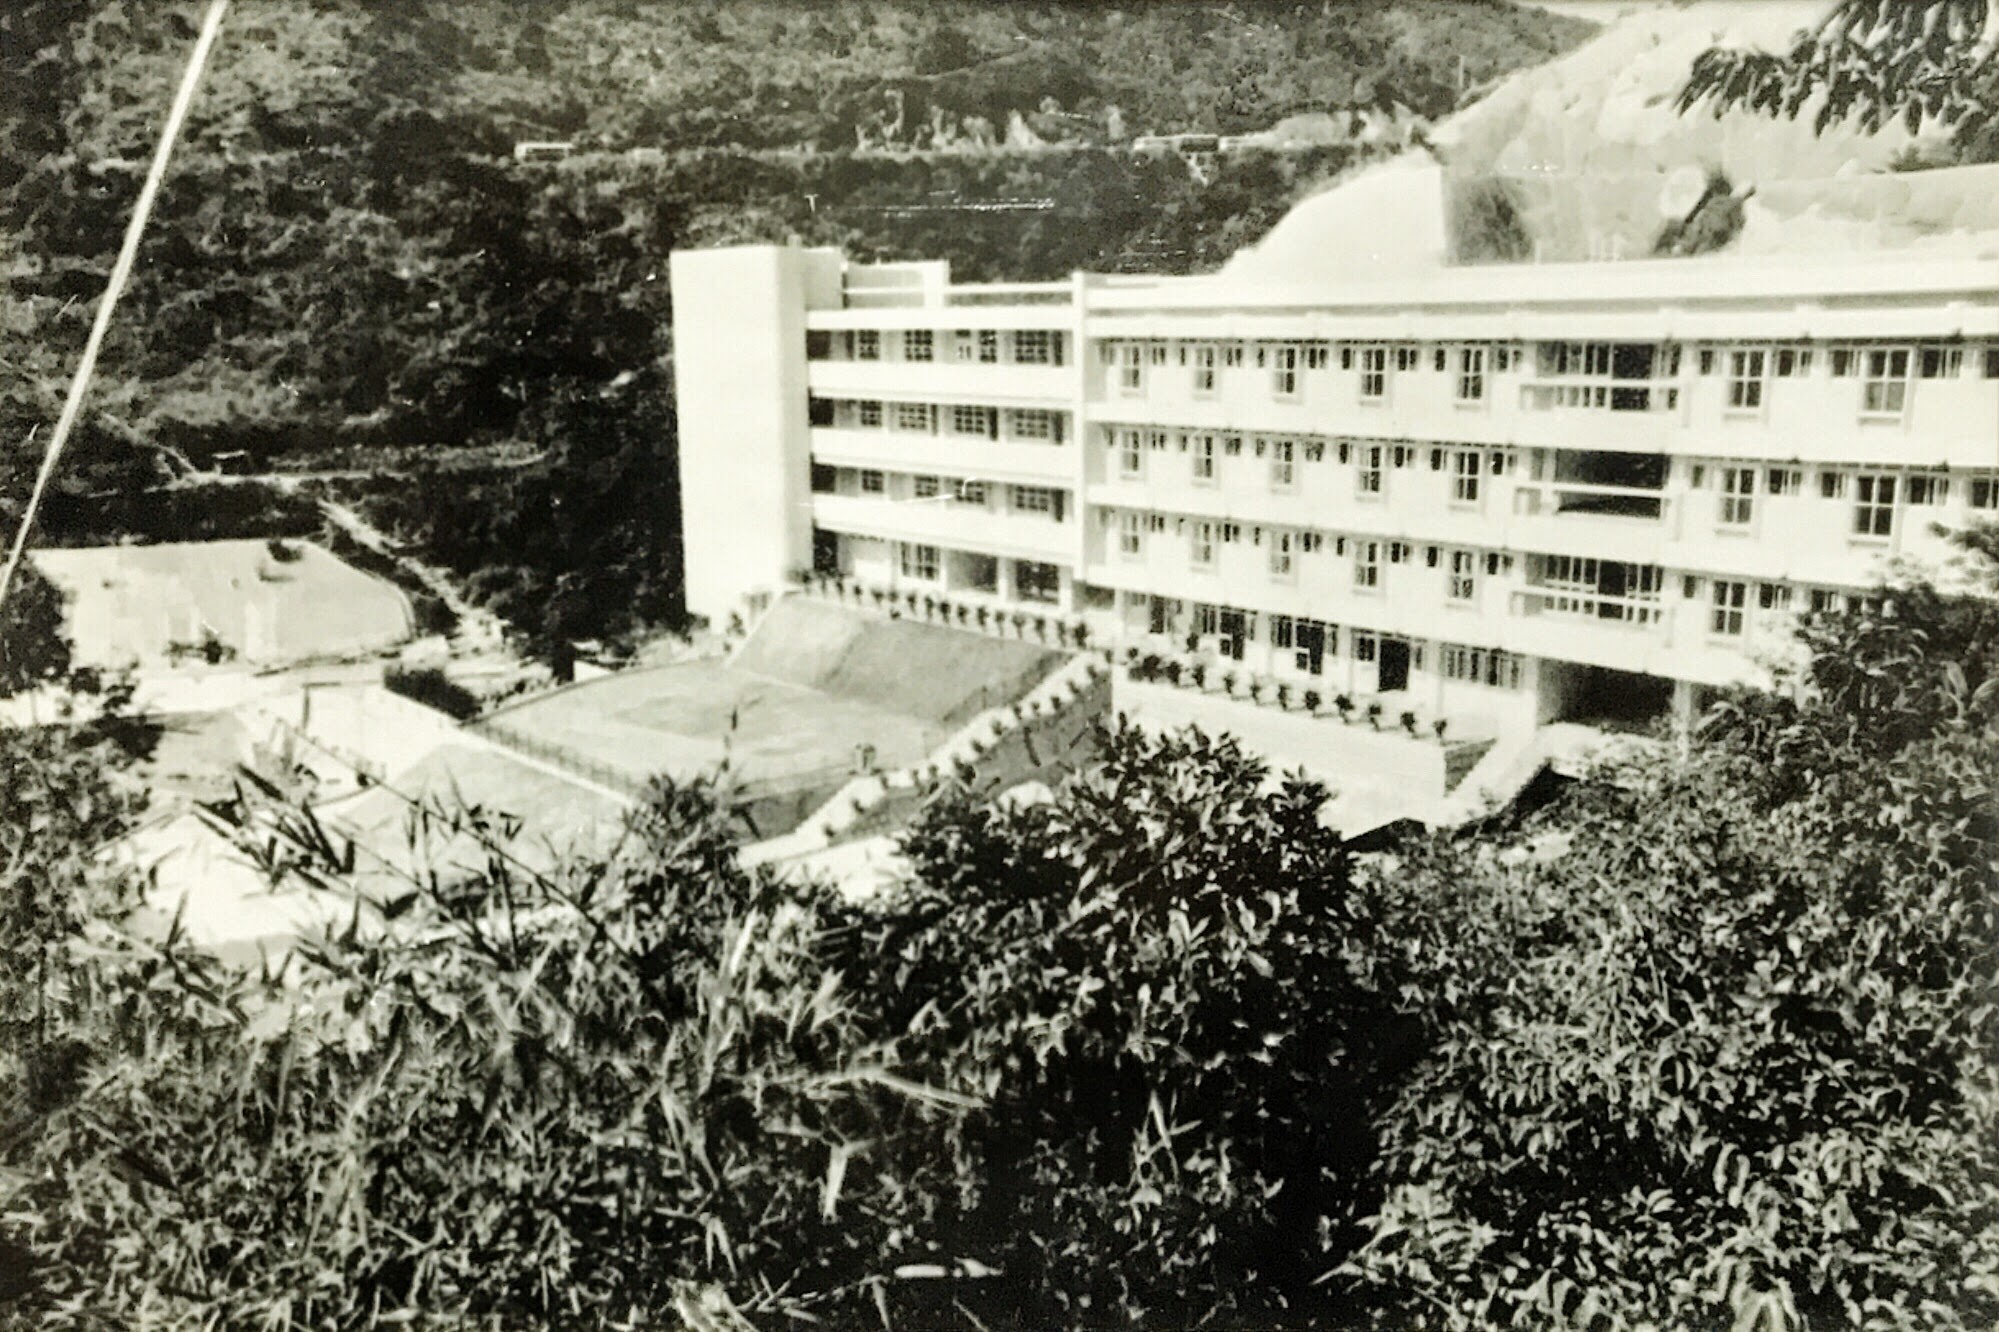 Theology Building upon Completion